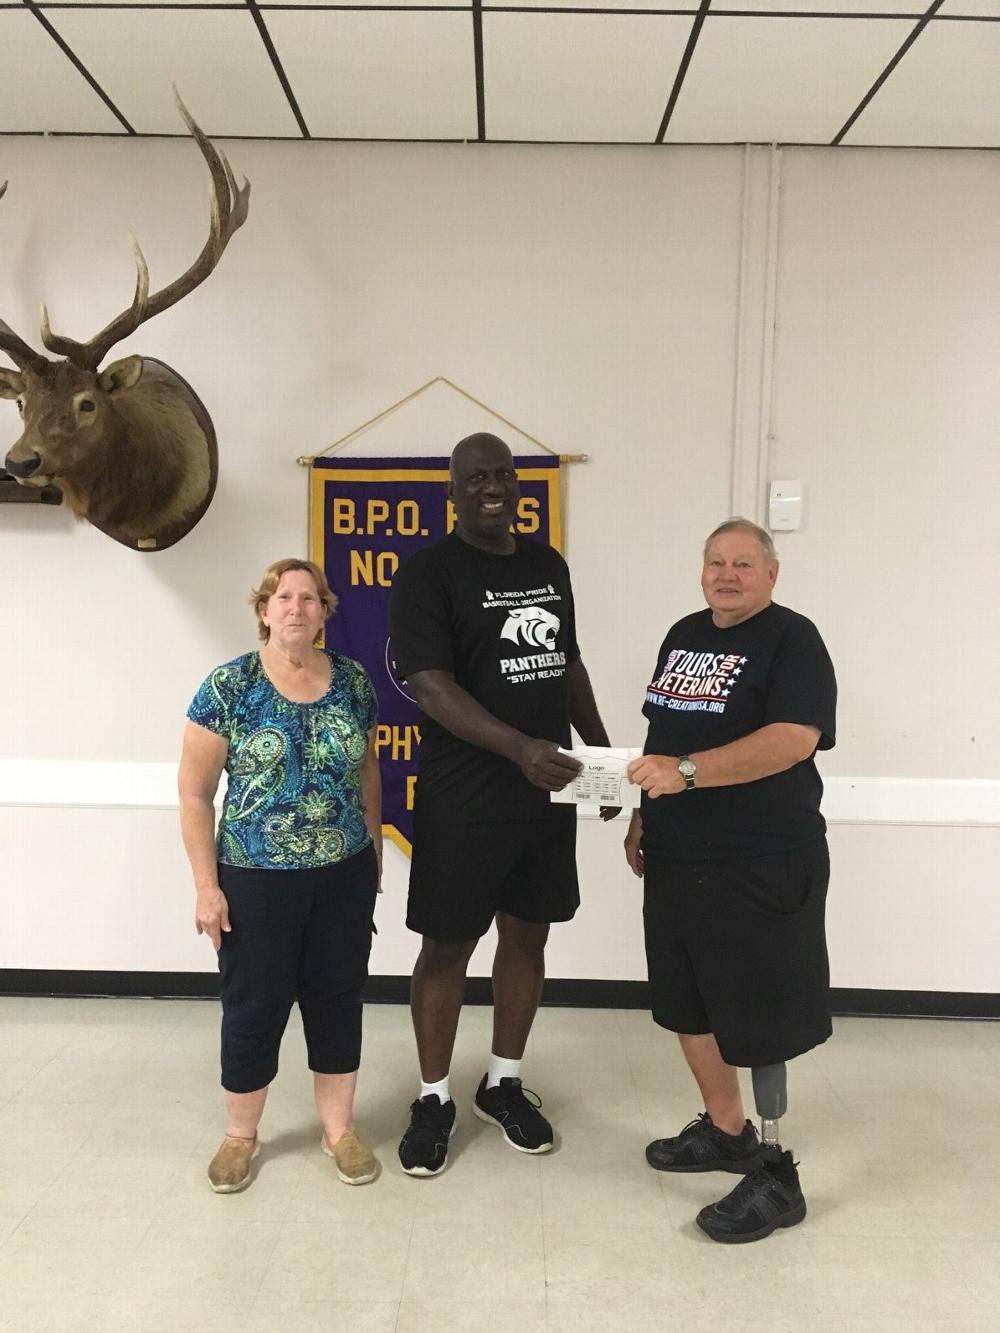 Sgt Smith is in charge of our Zephyrhills JrROTC team that we have supported in the past. This monetary donation made on 3/19/2019, in the amount of $500.00 for their basketball program. Presentation of the check is from Zephyrhills Lodge #2731.